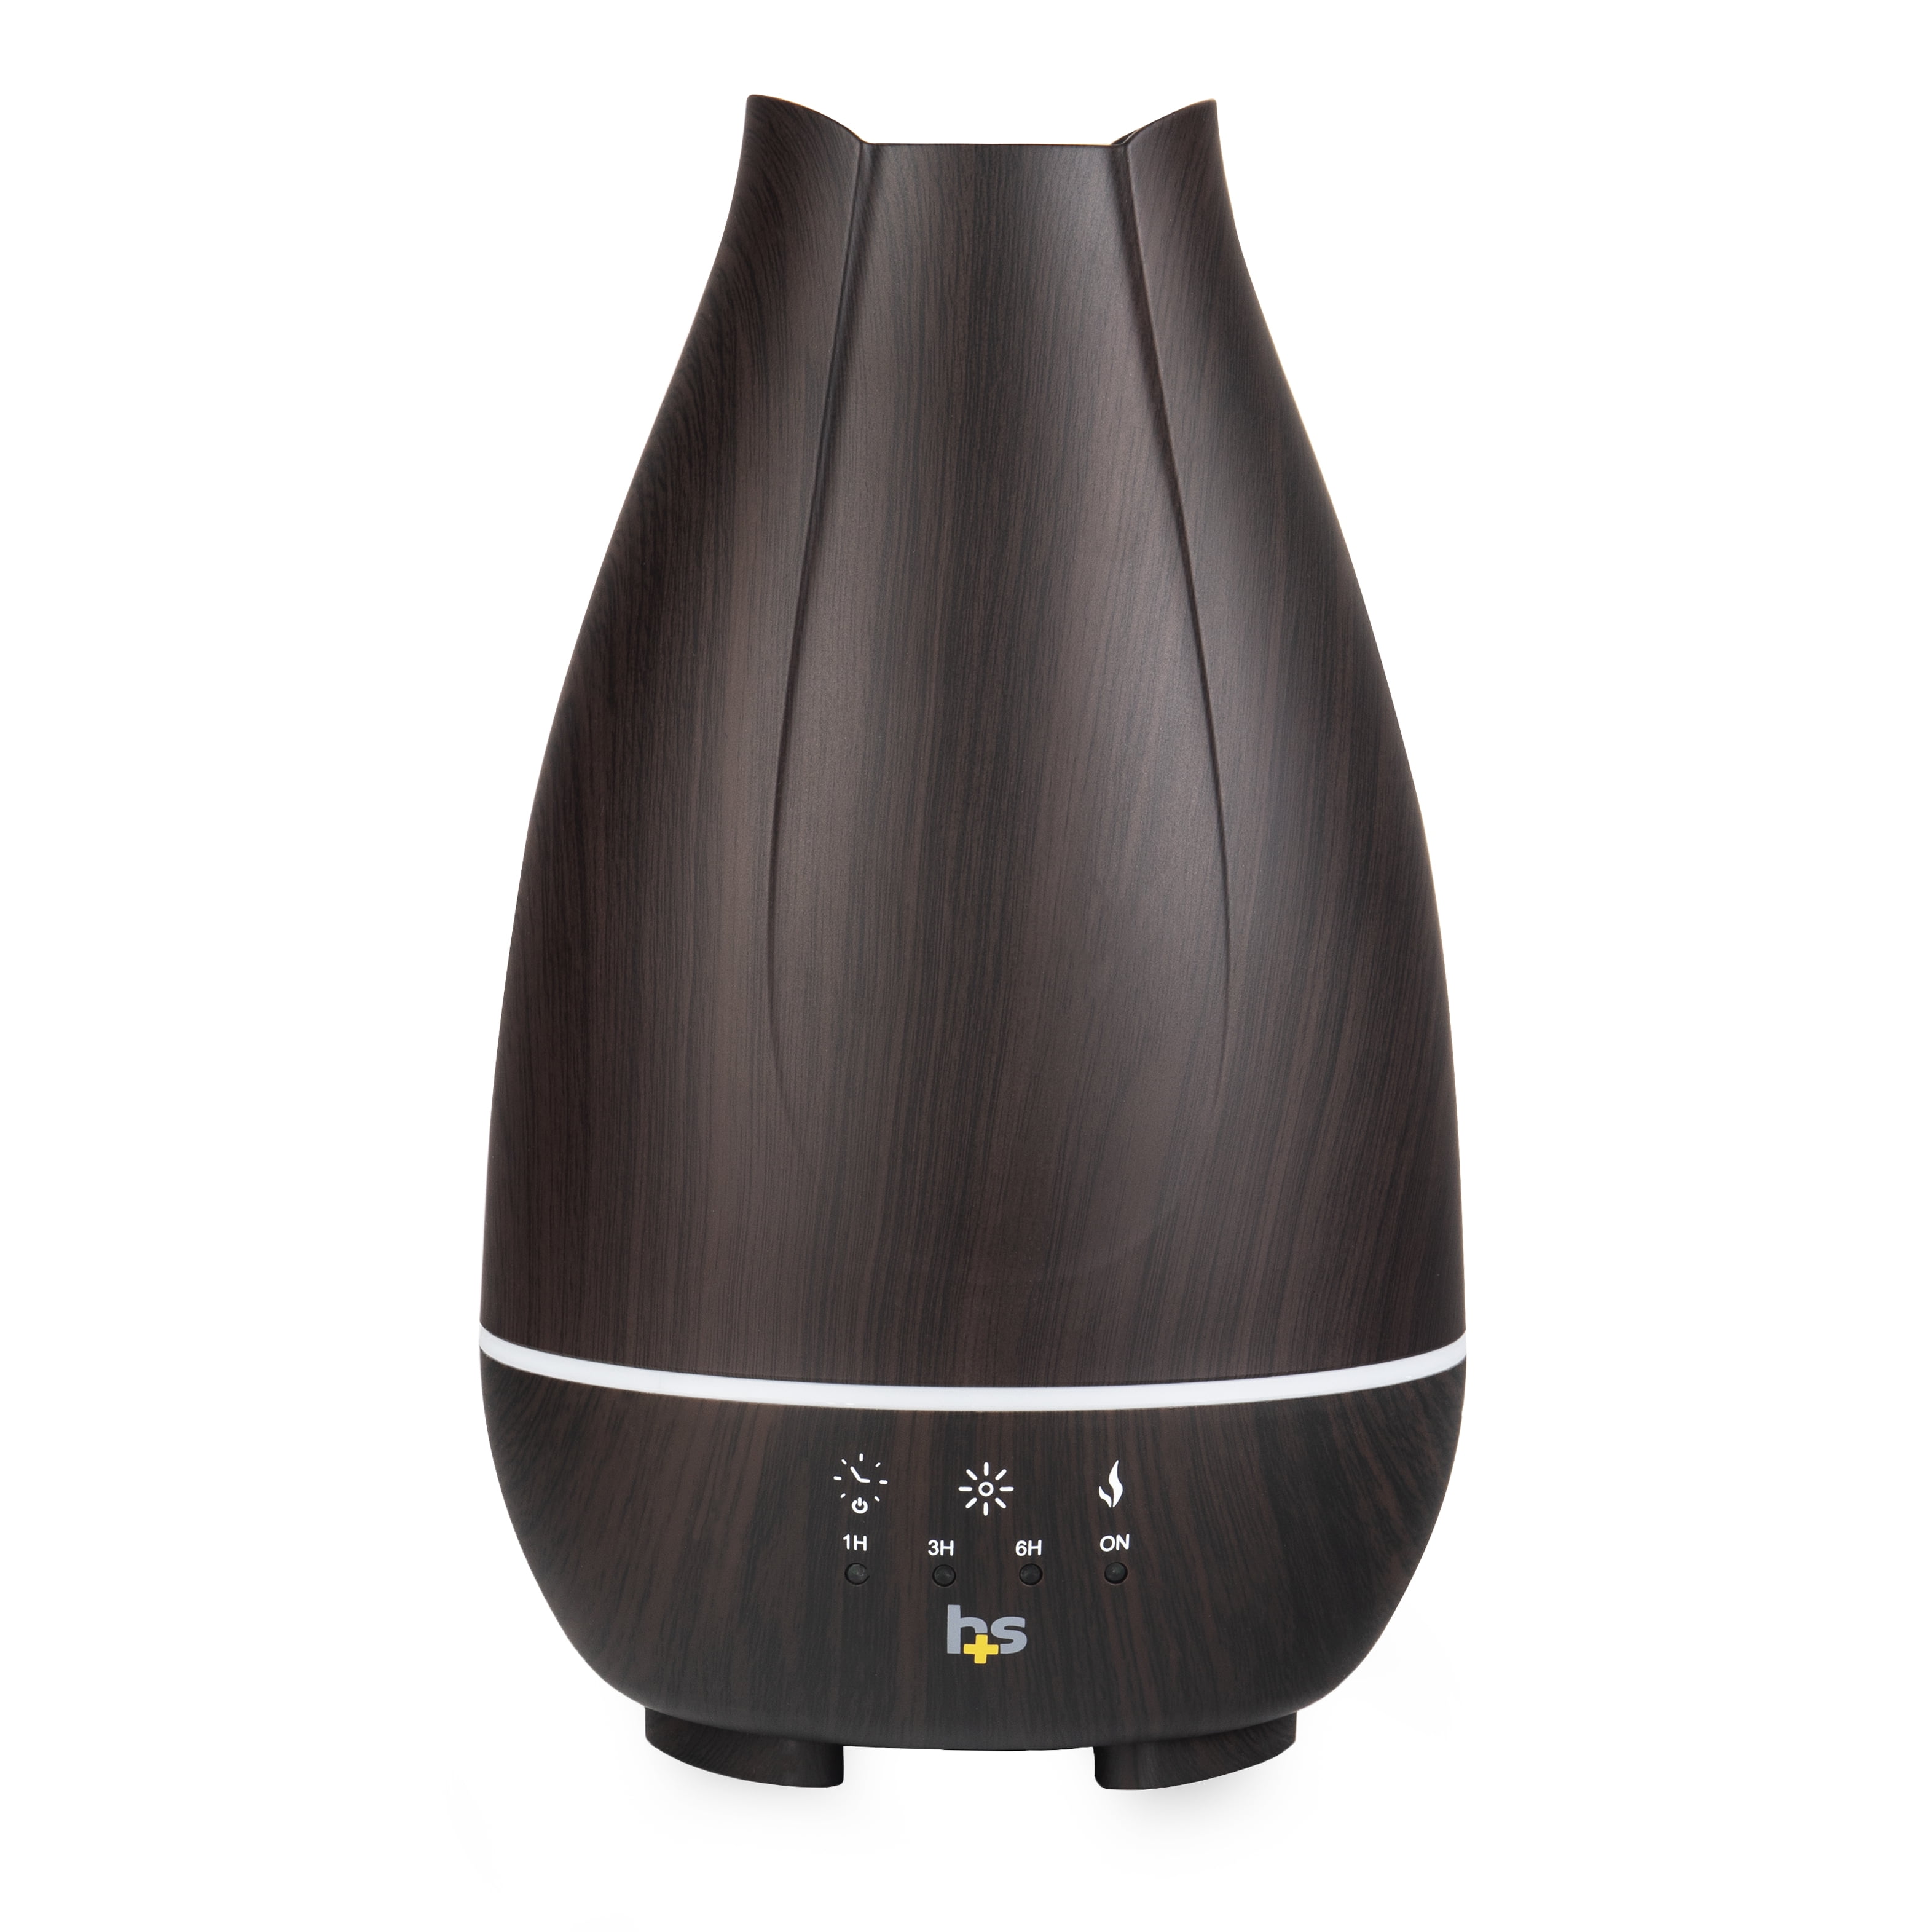 Details about   200ml Essential Oil Diffuser Humidifier Aromatherapy Mist 7 Color LED Ultrasonic 